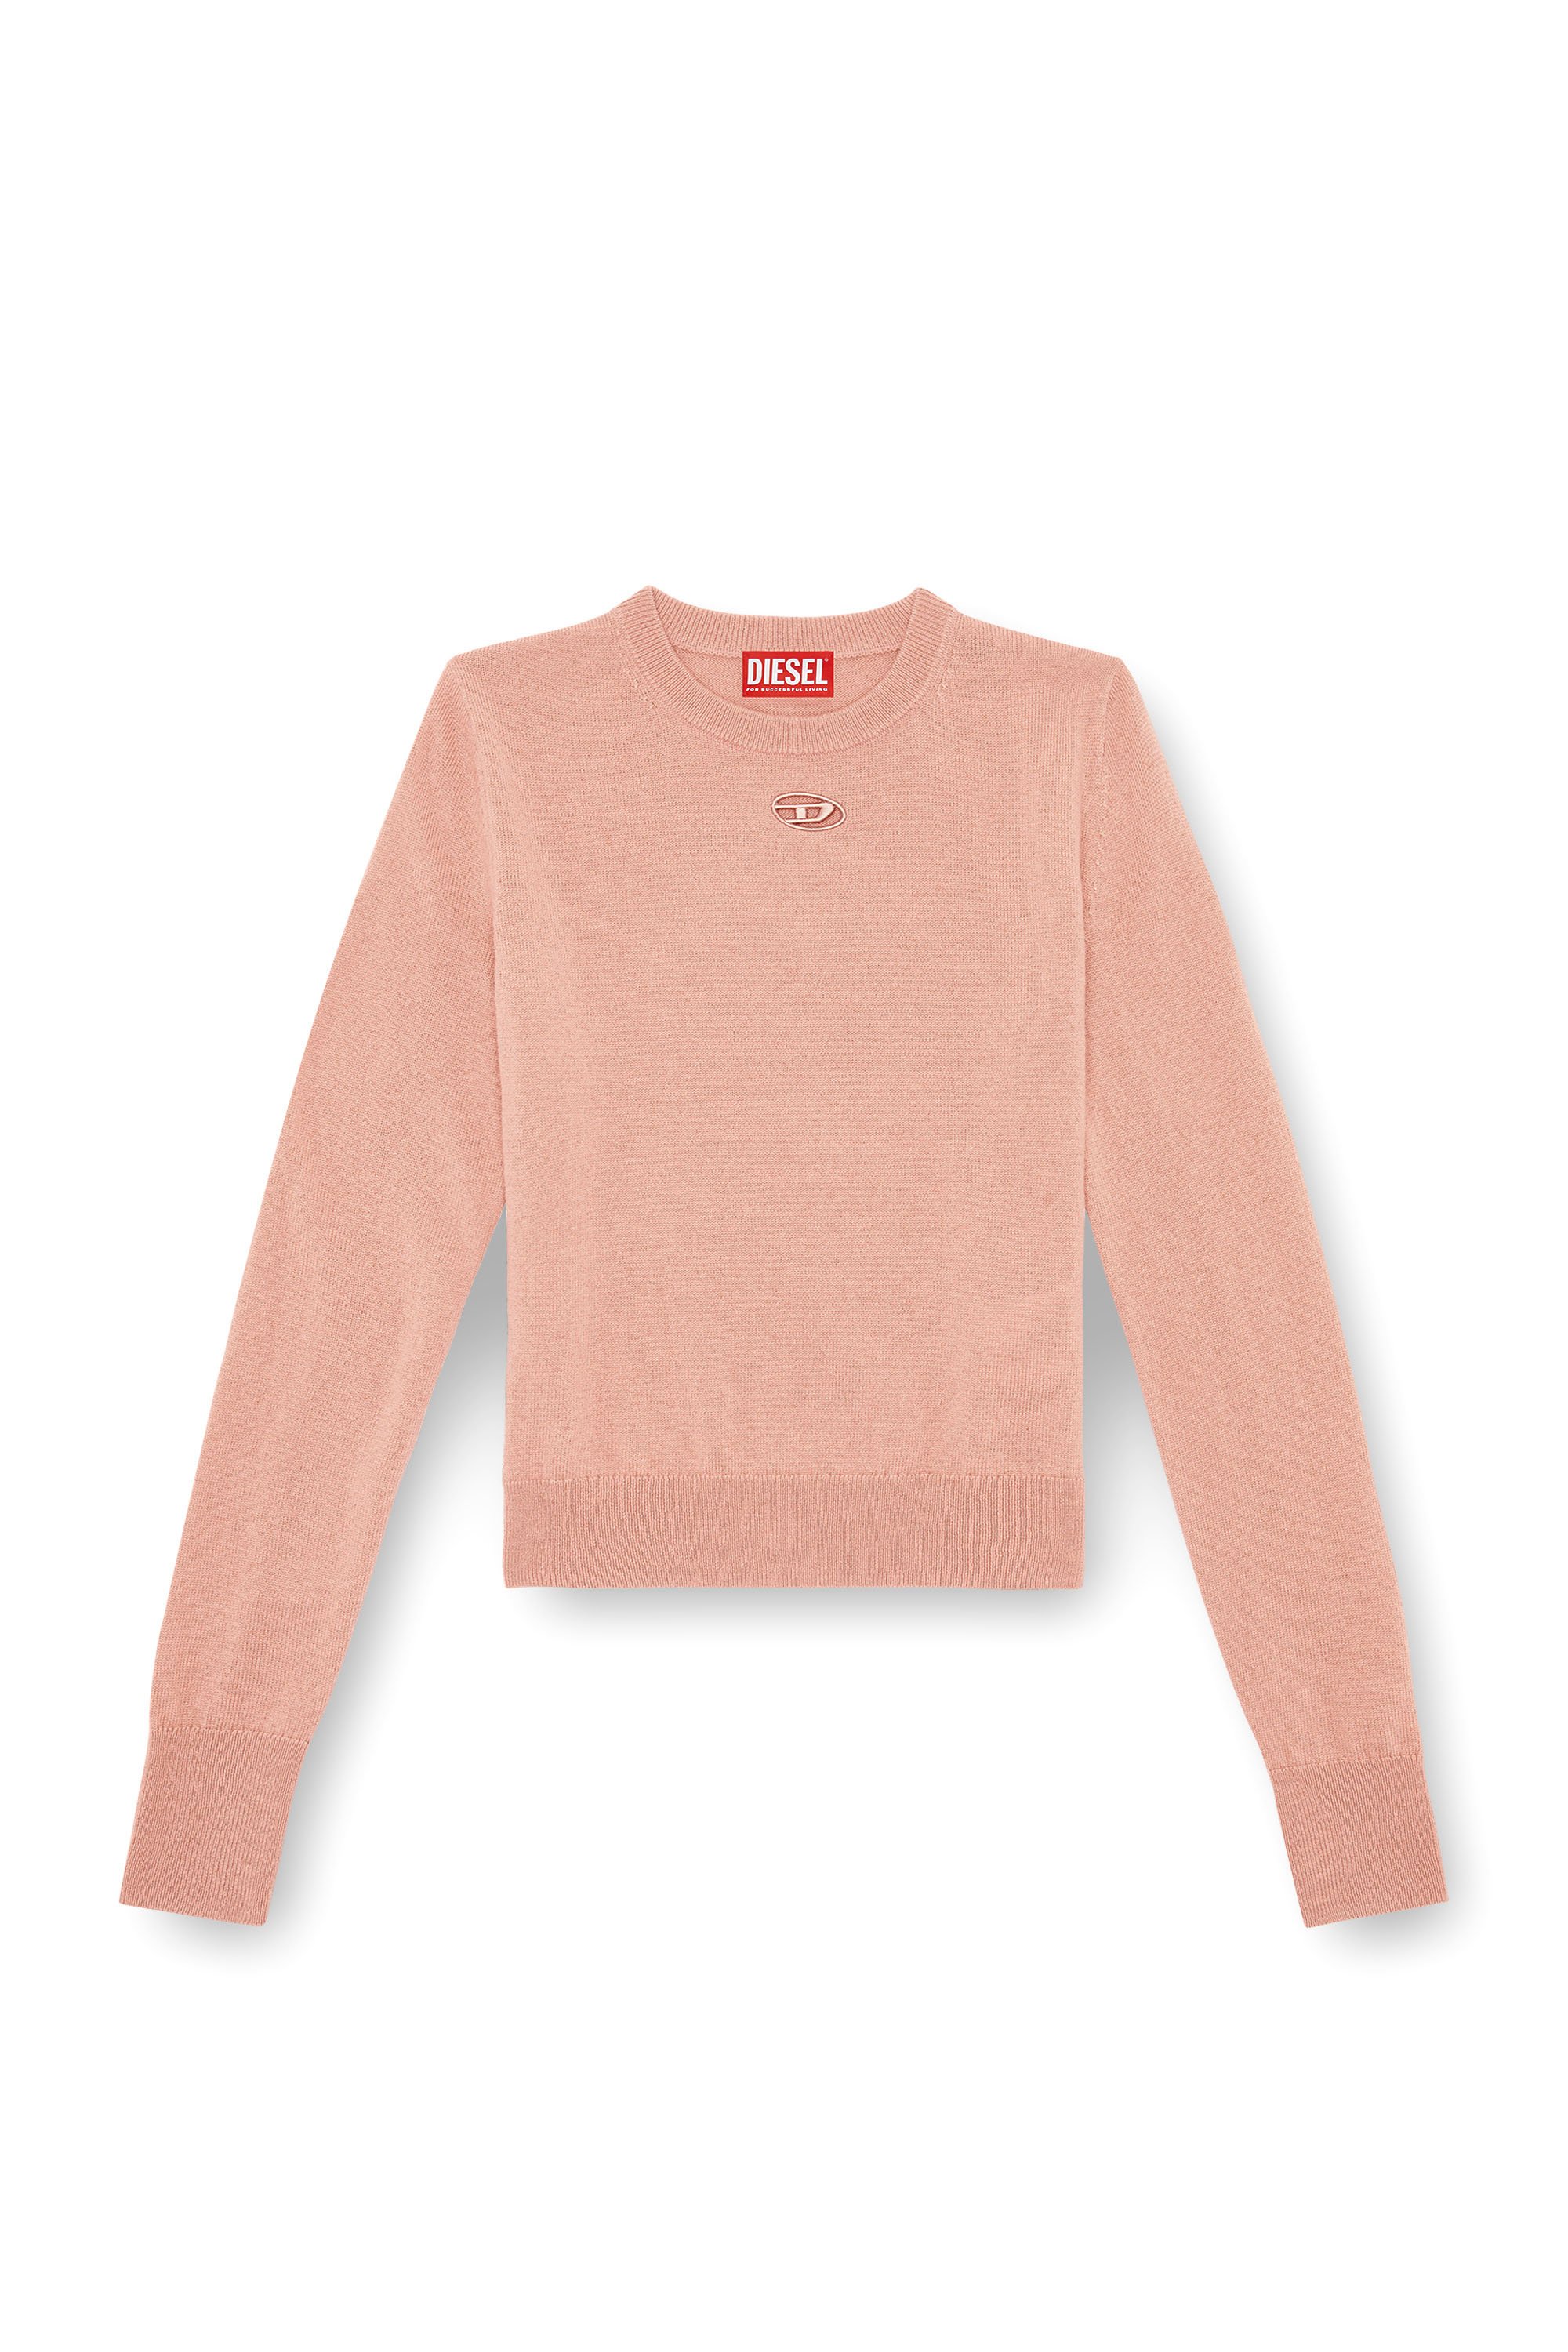 Diesel - M-AREESAX, Woman Wool and cashmere top in Pink - Image 3